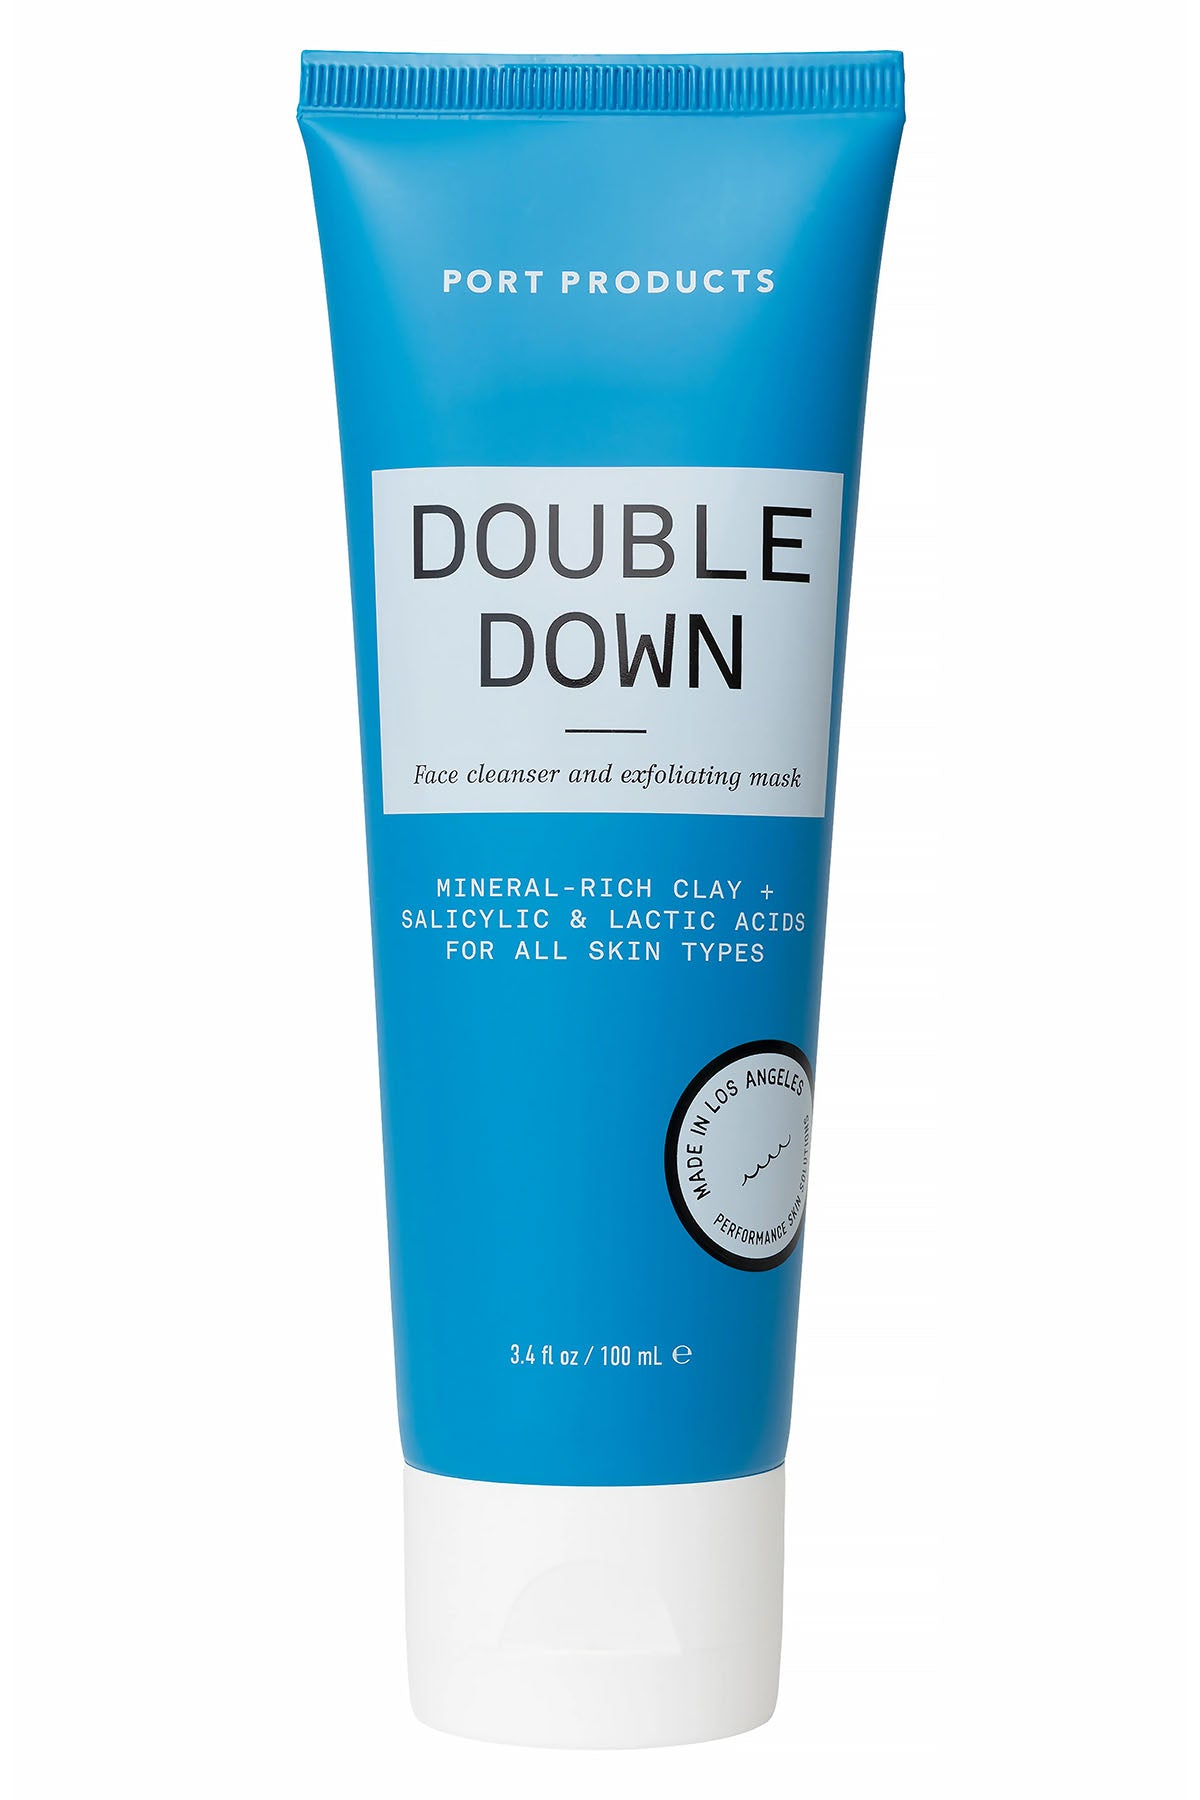 Port Products Double Down Face Cleanser & Exfoliating Mask 100 ML